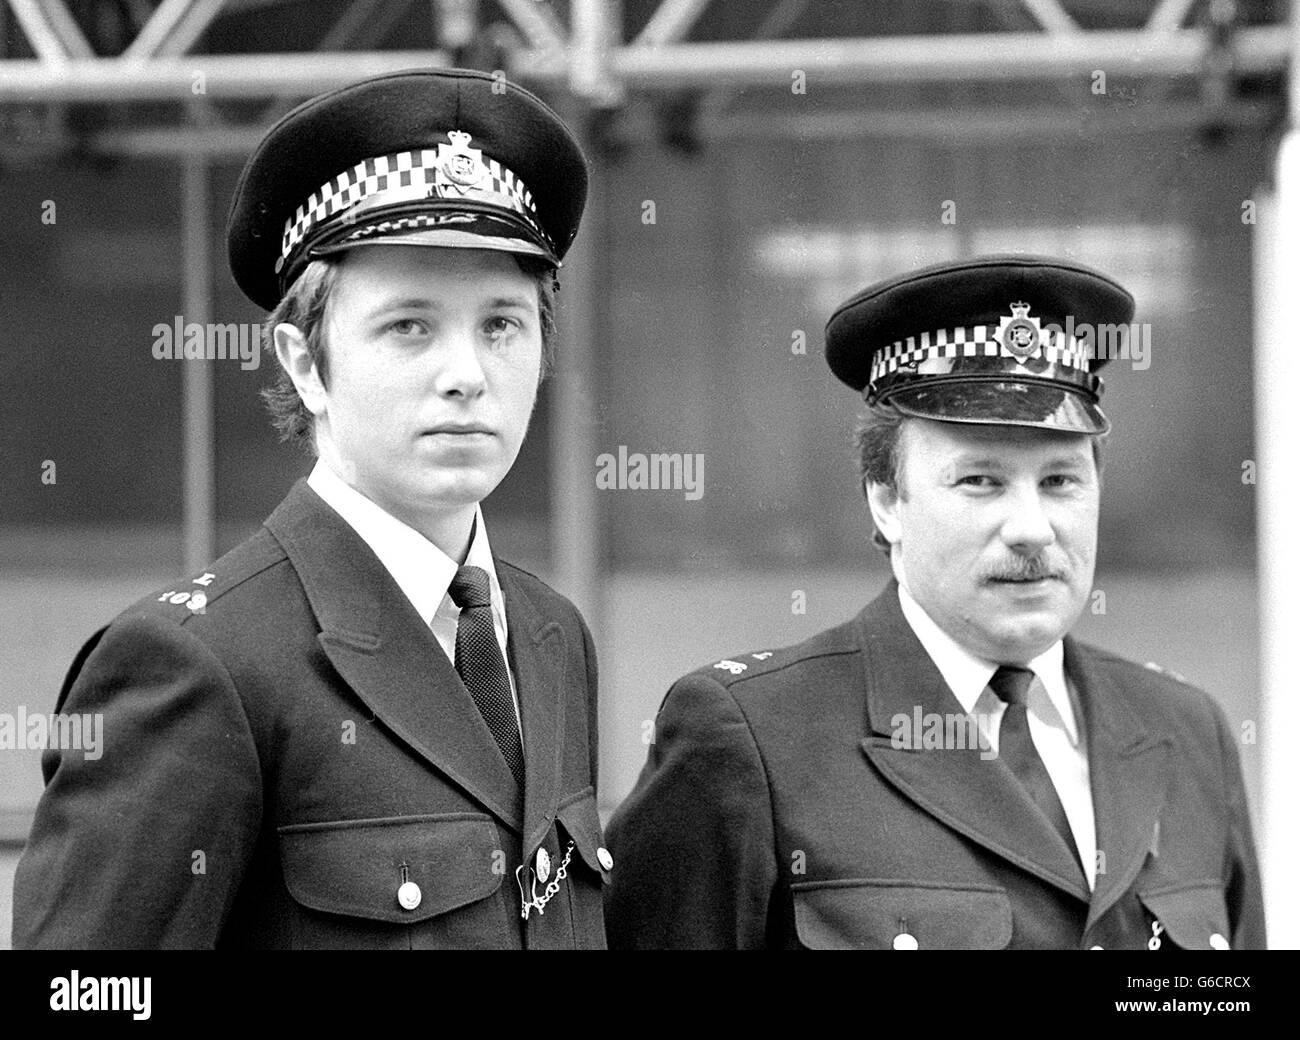 PCs Clive Blake (l), 25, and Ian Rickard, 34, who helped detain two men in Brixton, London, after a car chase following the assassination attempt on Israeli ambassador, Schlome Argov near the Dorchester Hotel. Stock Photo